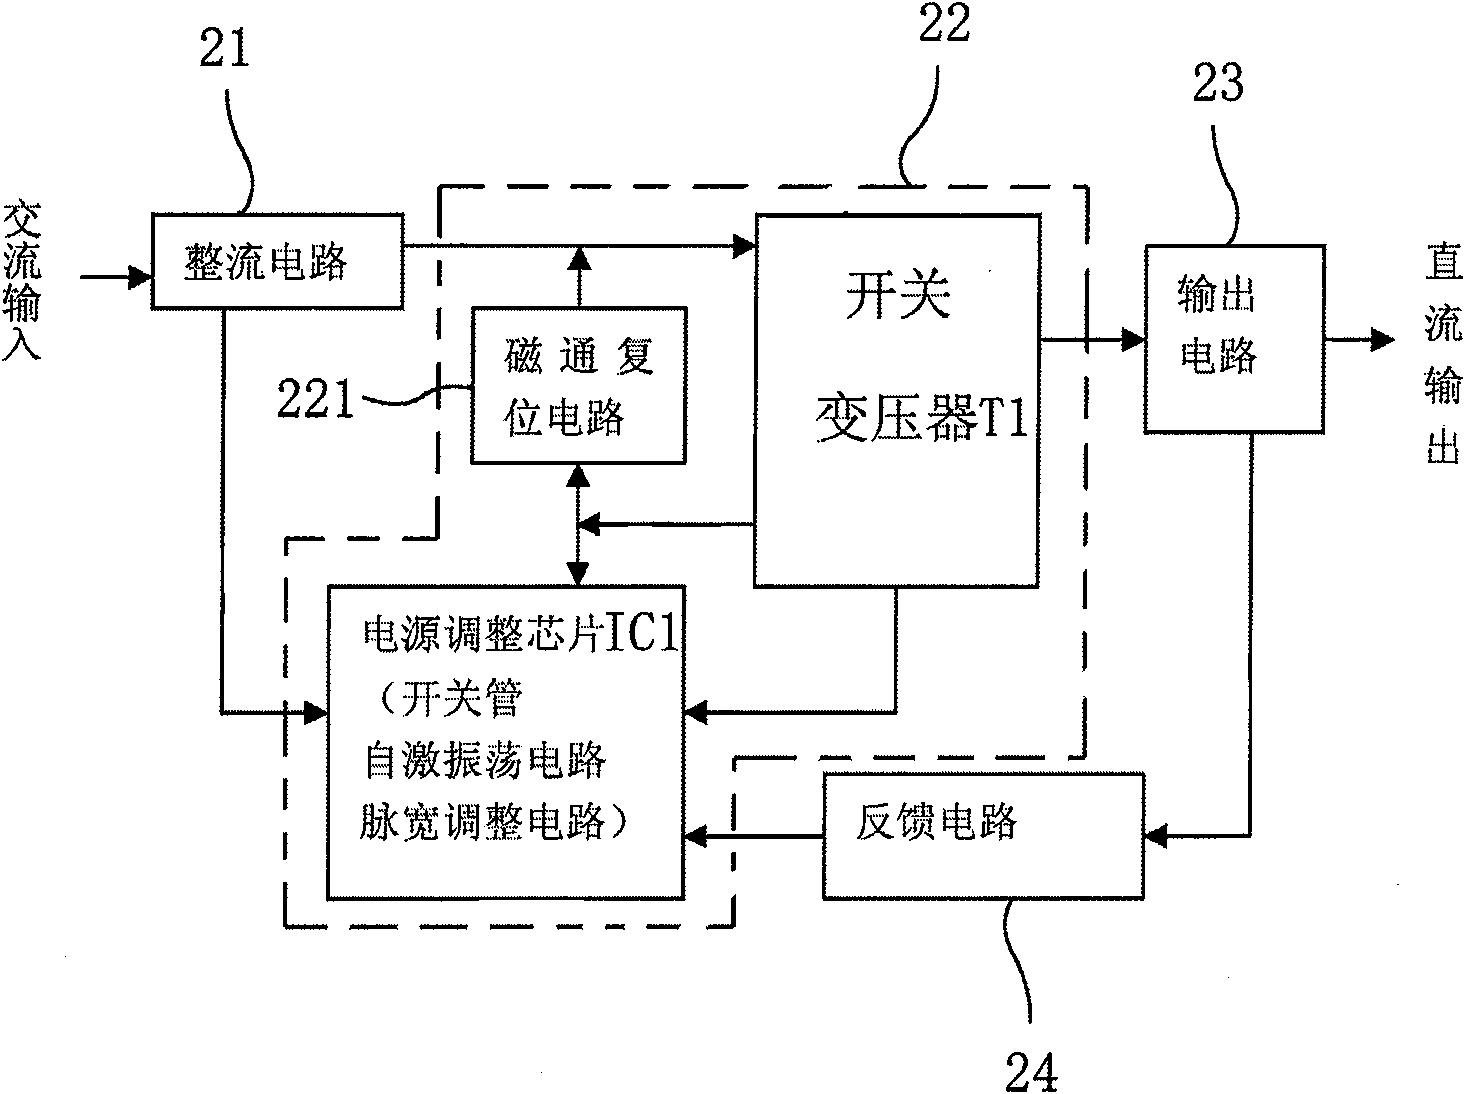 Alternating current power supply electronic clock with power saving structure